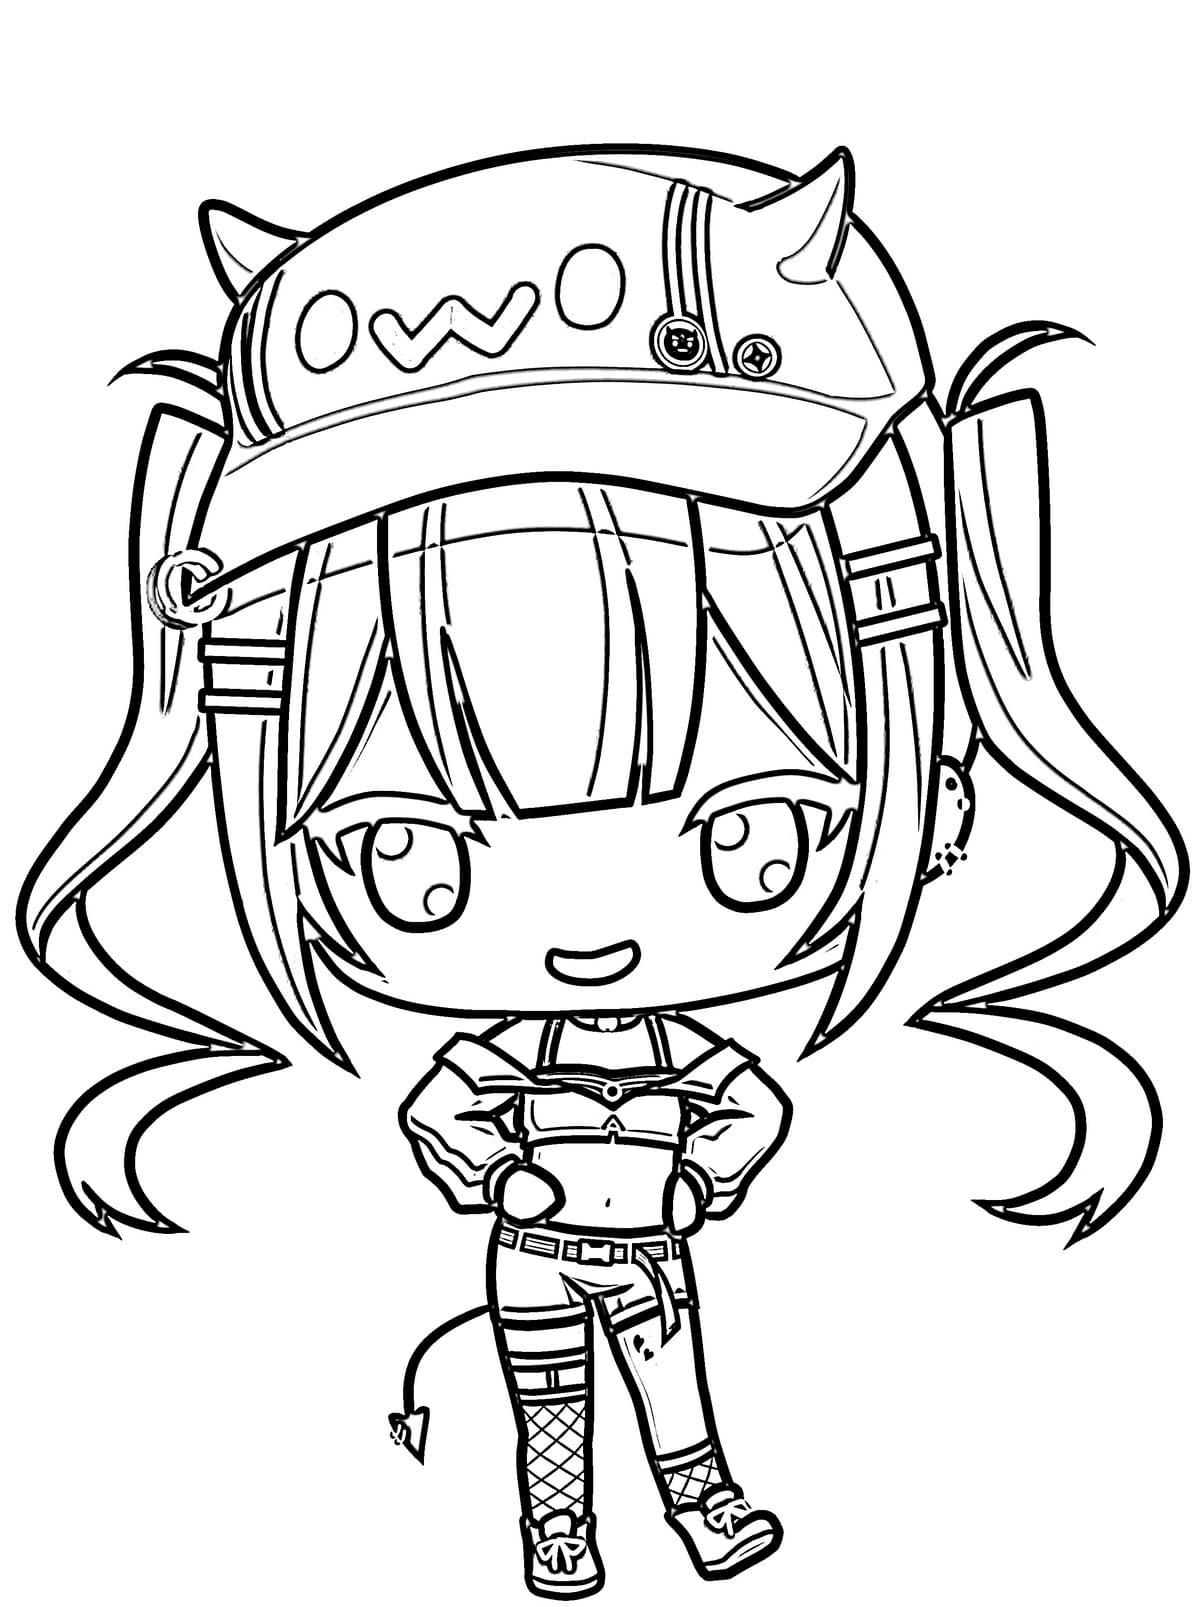 Coloring page Chibi The girl in the cap